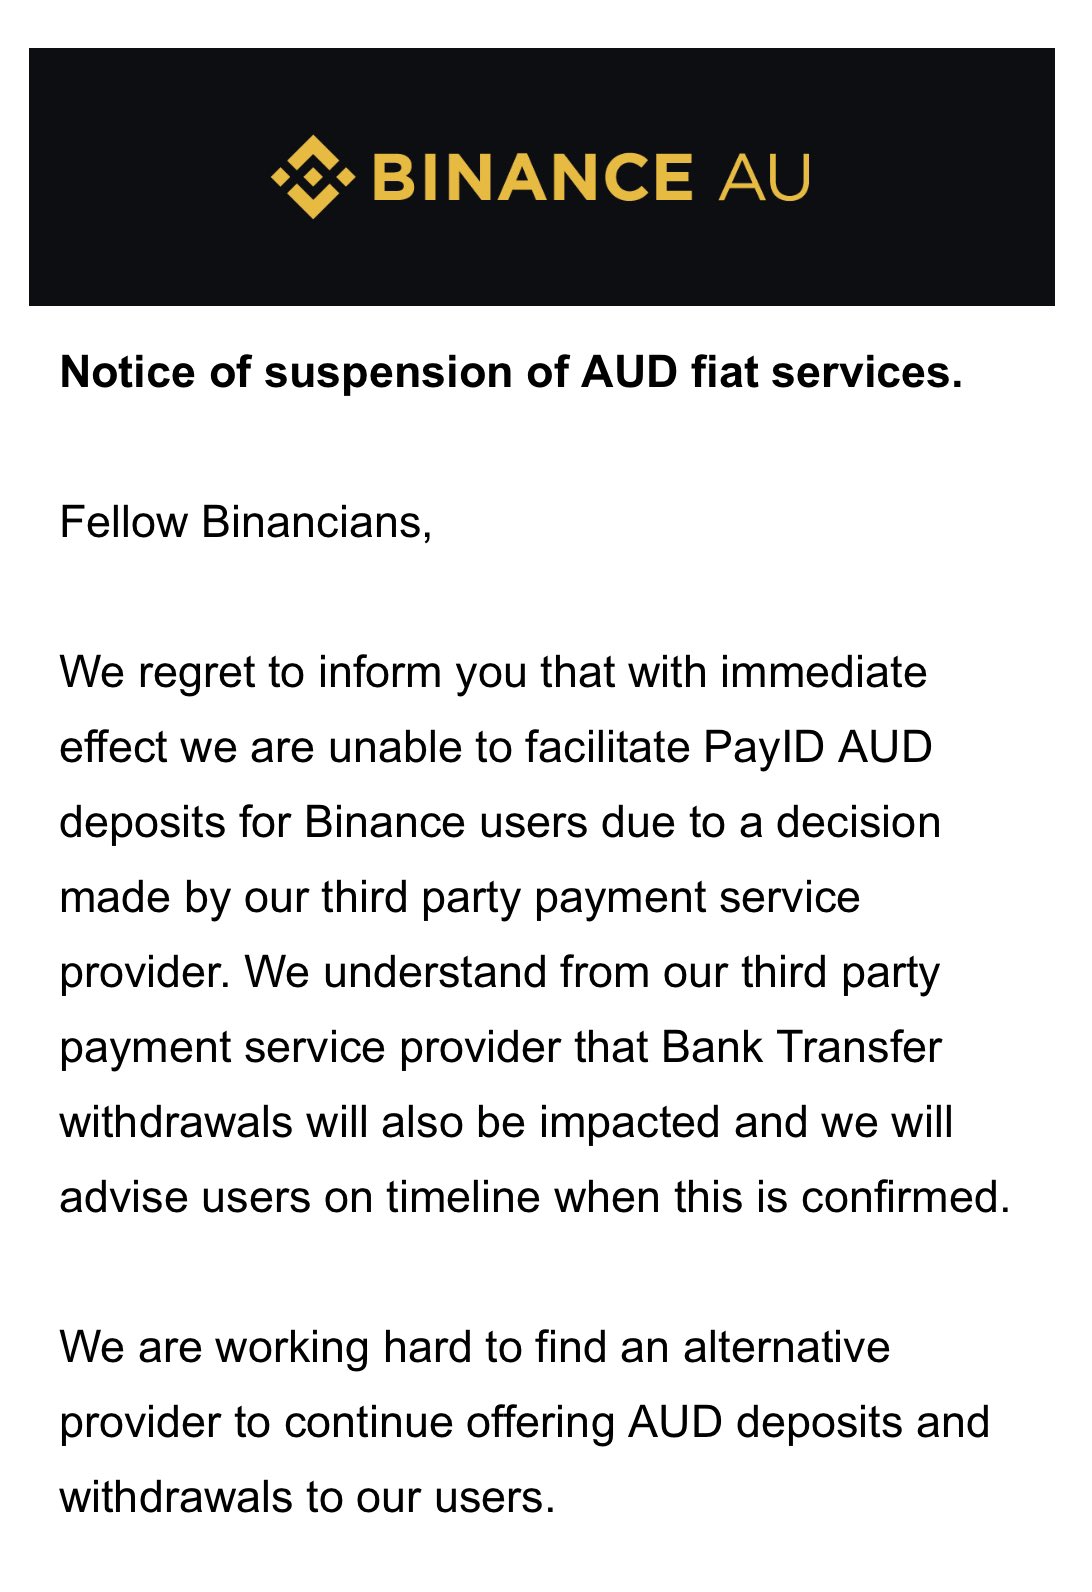 Binance notice of suspension of AUD fiat services